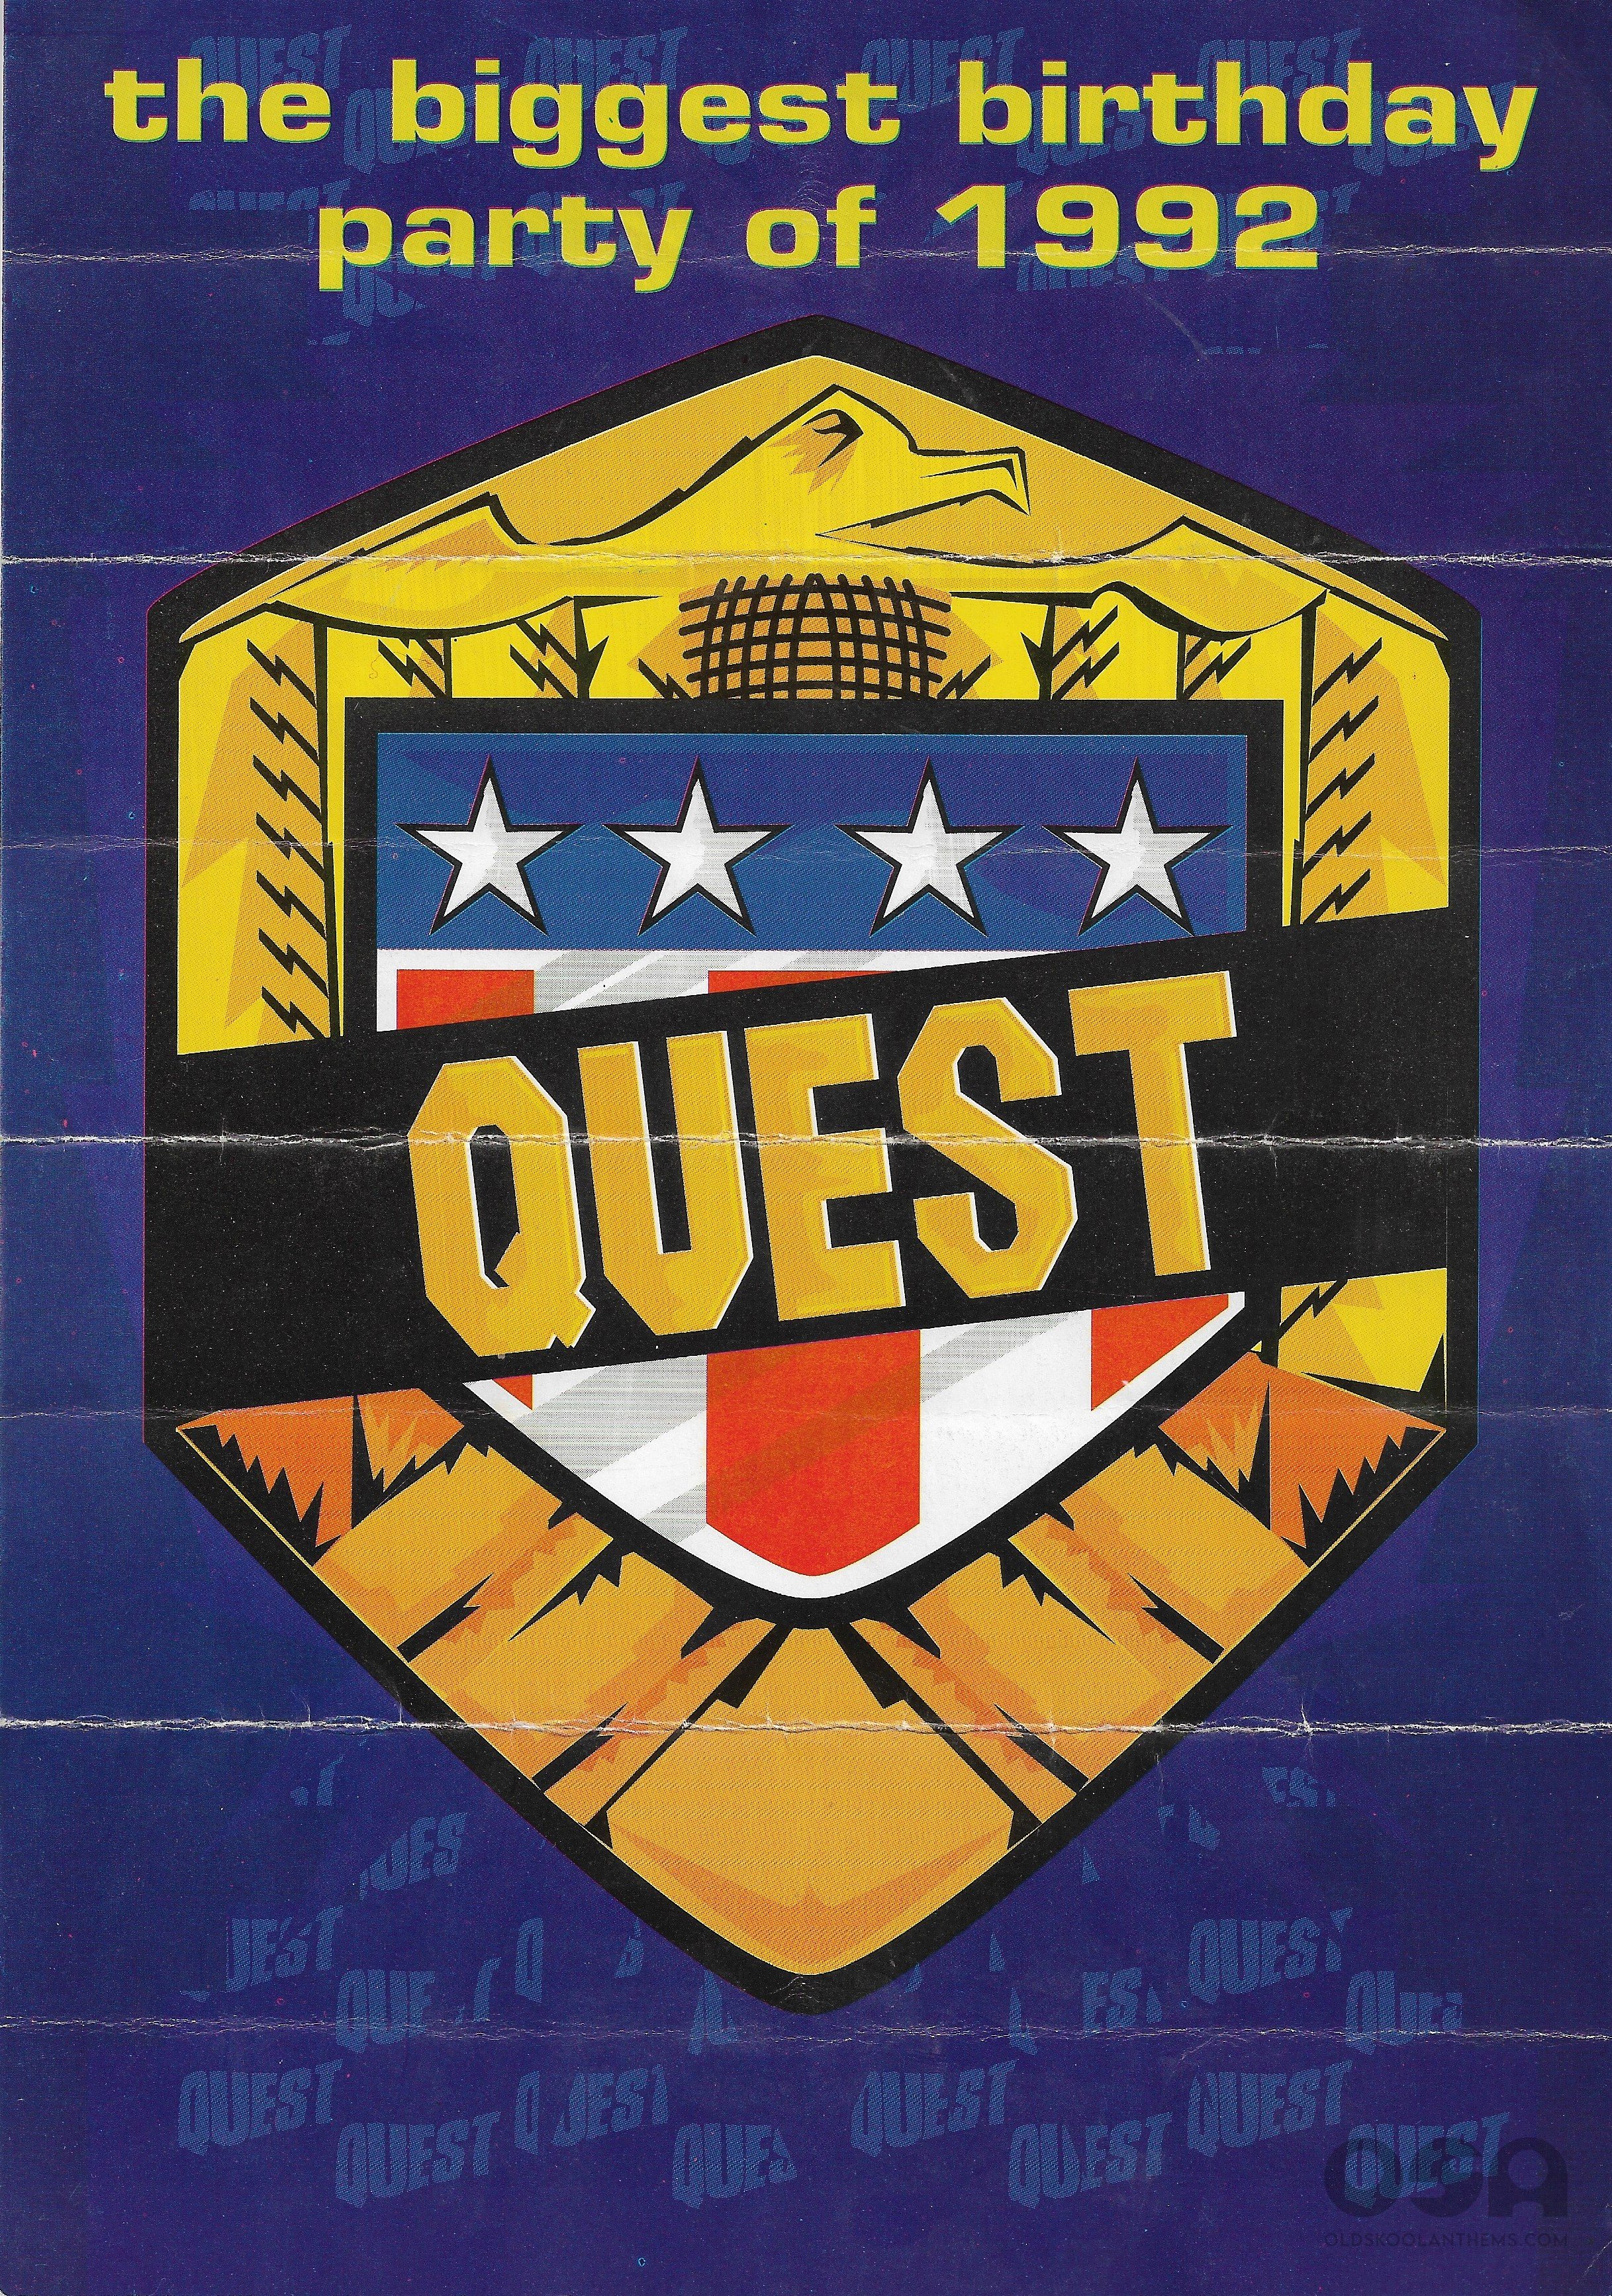 Quest - Biggest Birthday Party - Wolverhampton - 5th September 1992 - A .jpg